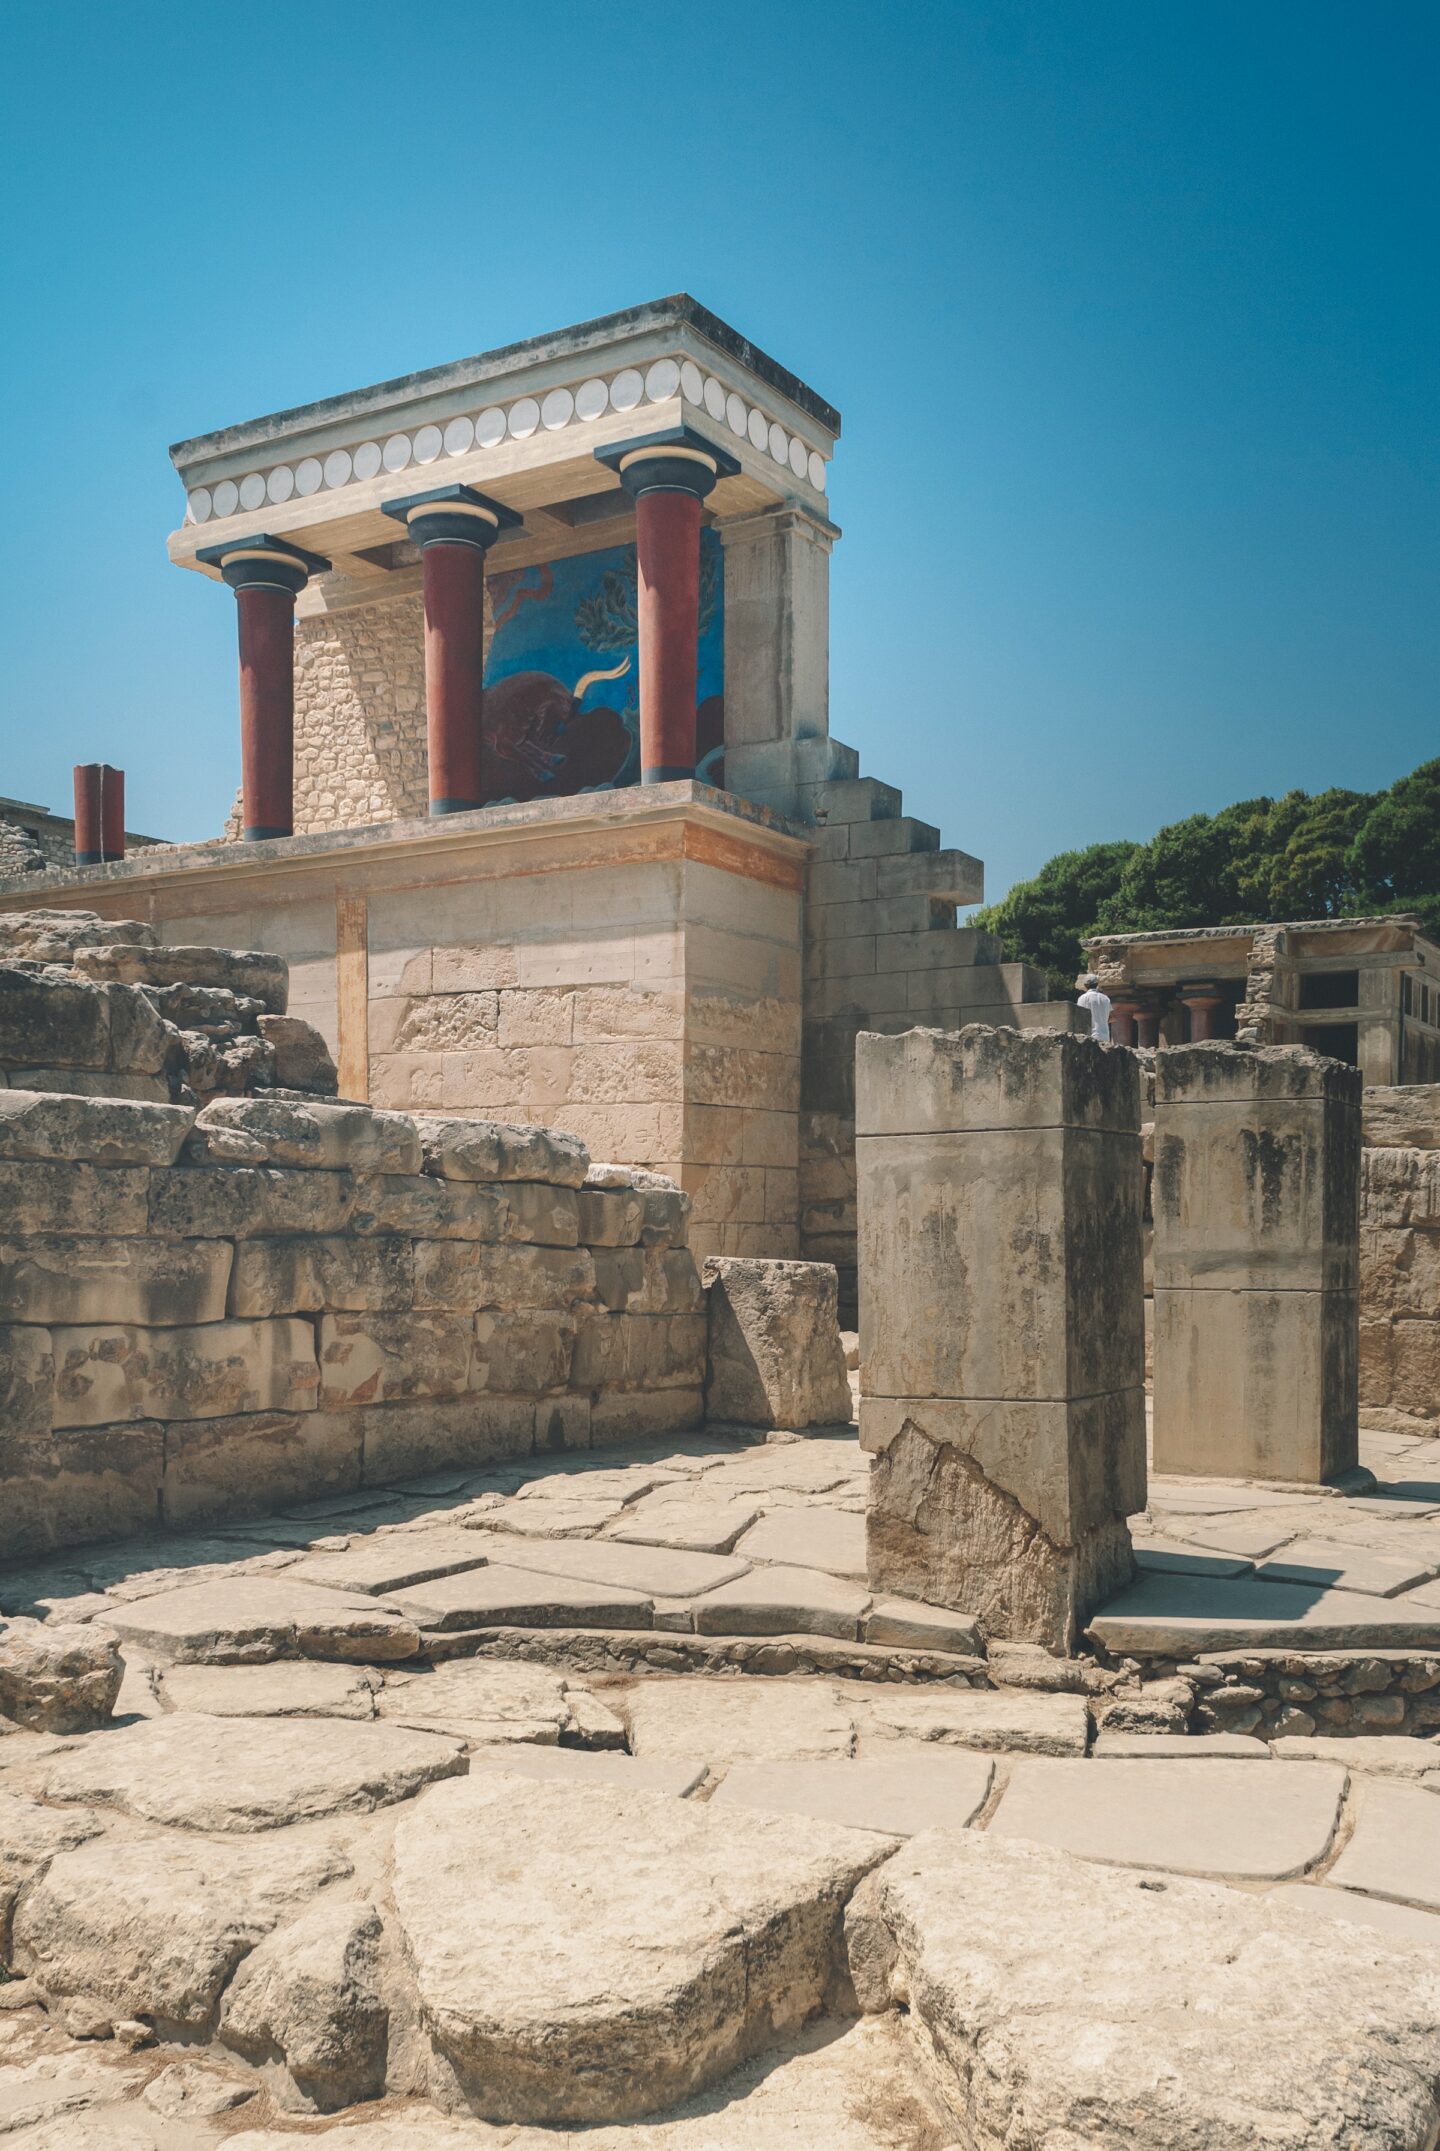 The ancient ruins of Knossos Palace is one of the top things to do in Crete